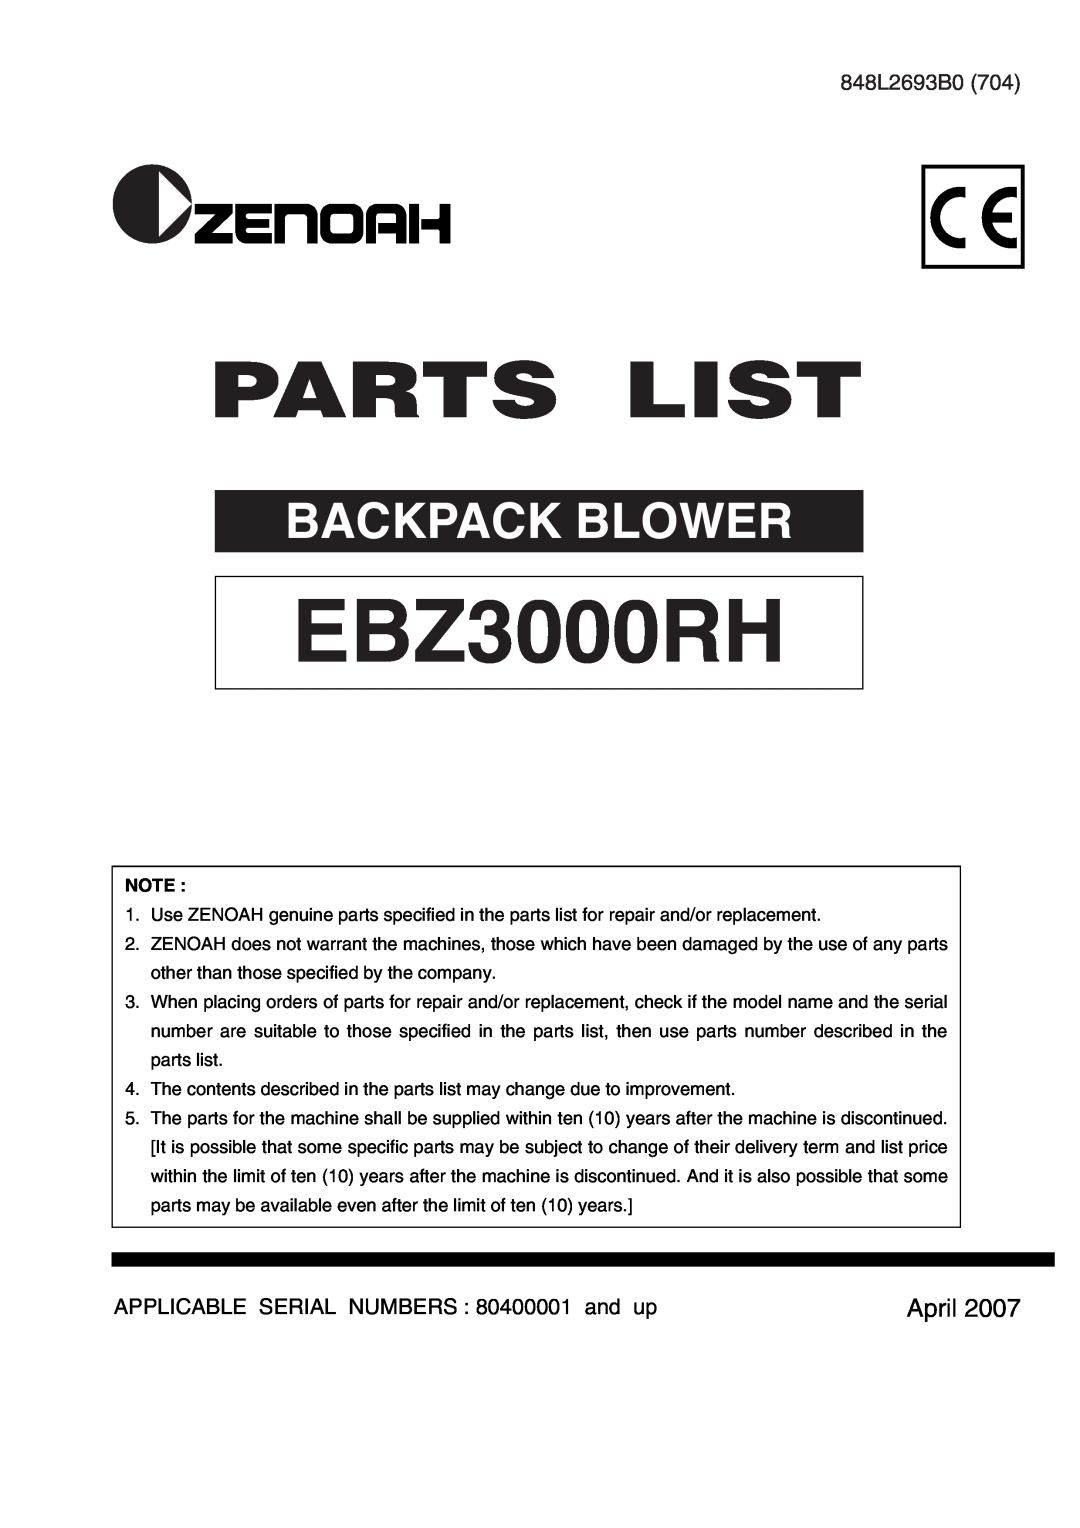 Zenoah EBZ3000RH manual Parts List, Backpack Blower, April, 848L2693B0, APPLICABLE SERIAL NUMBERS 80400001 and up 